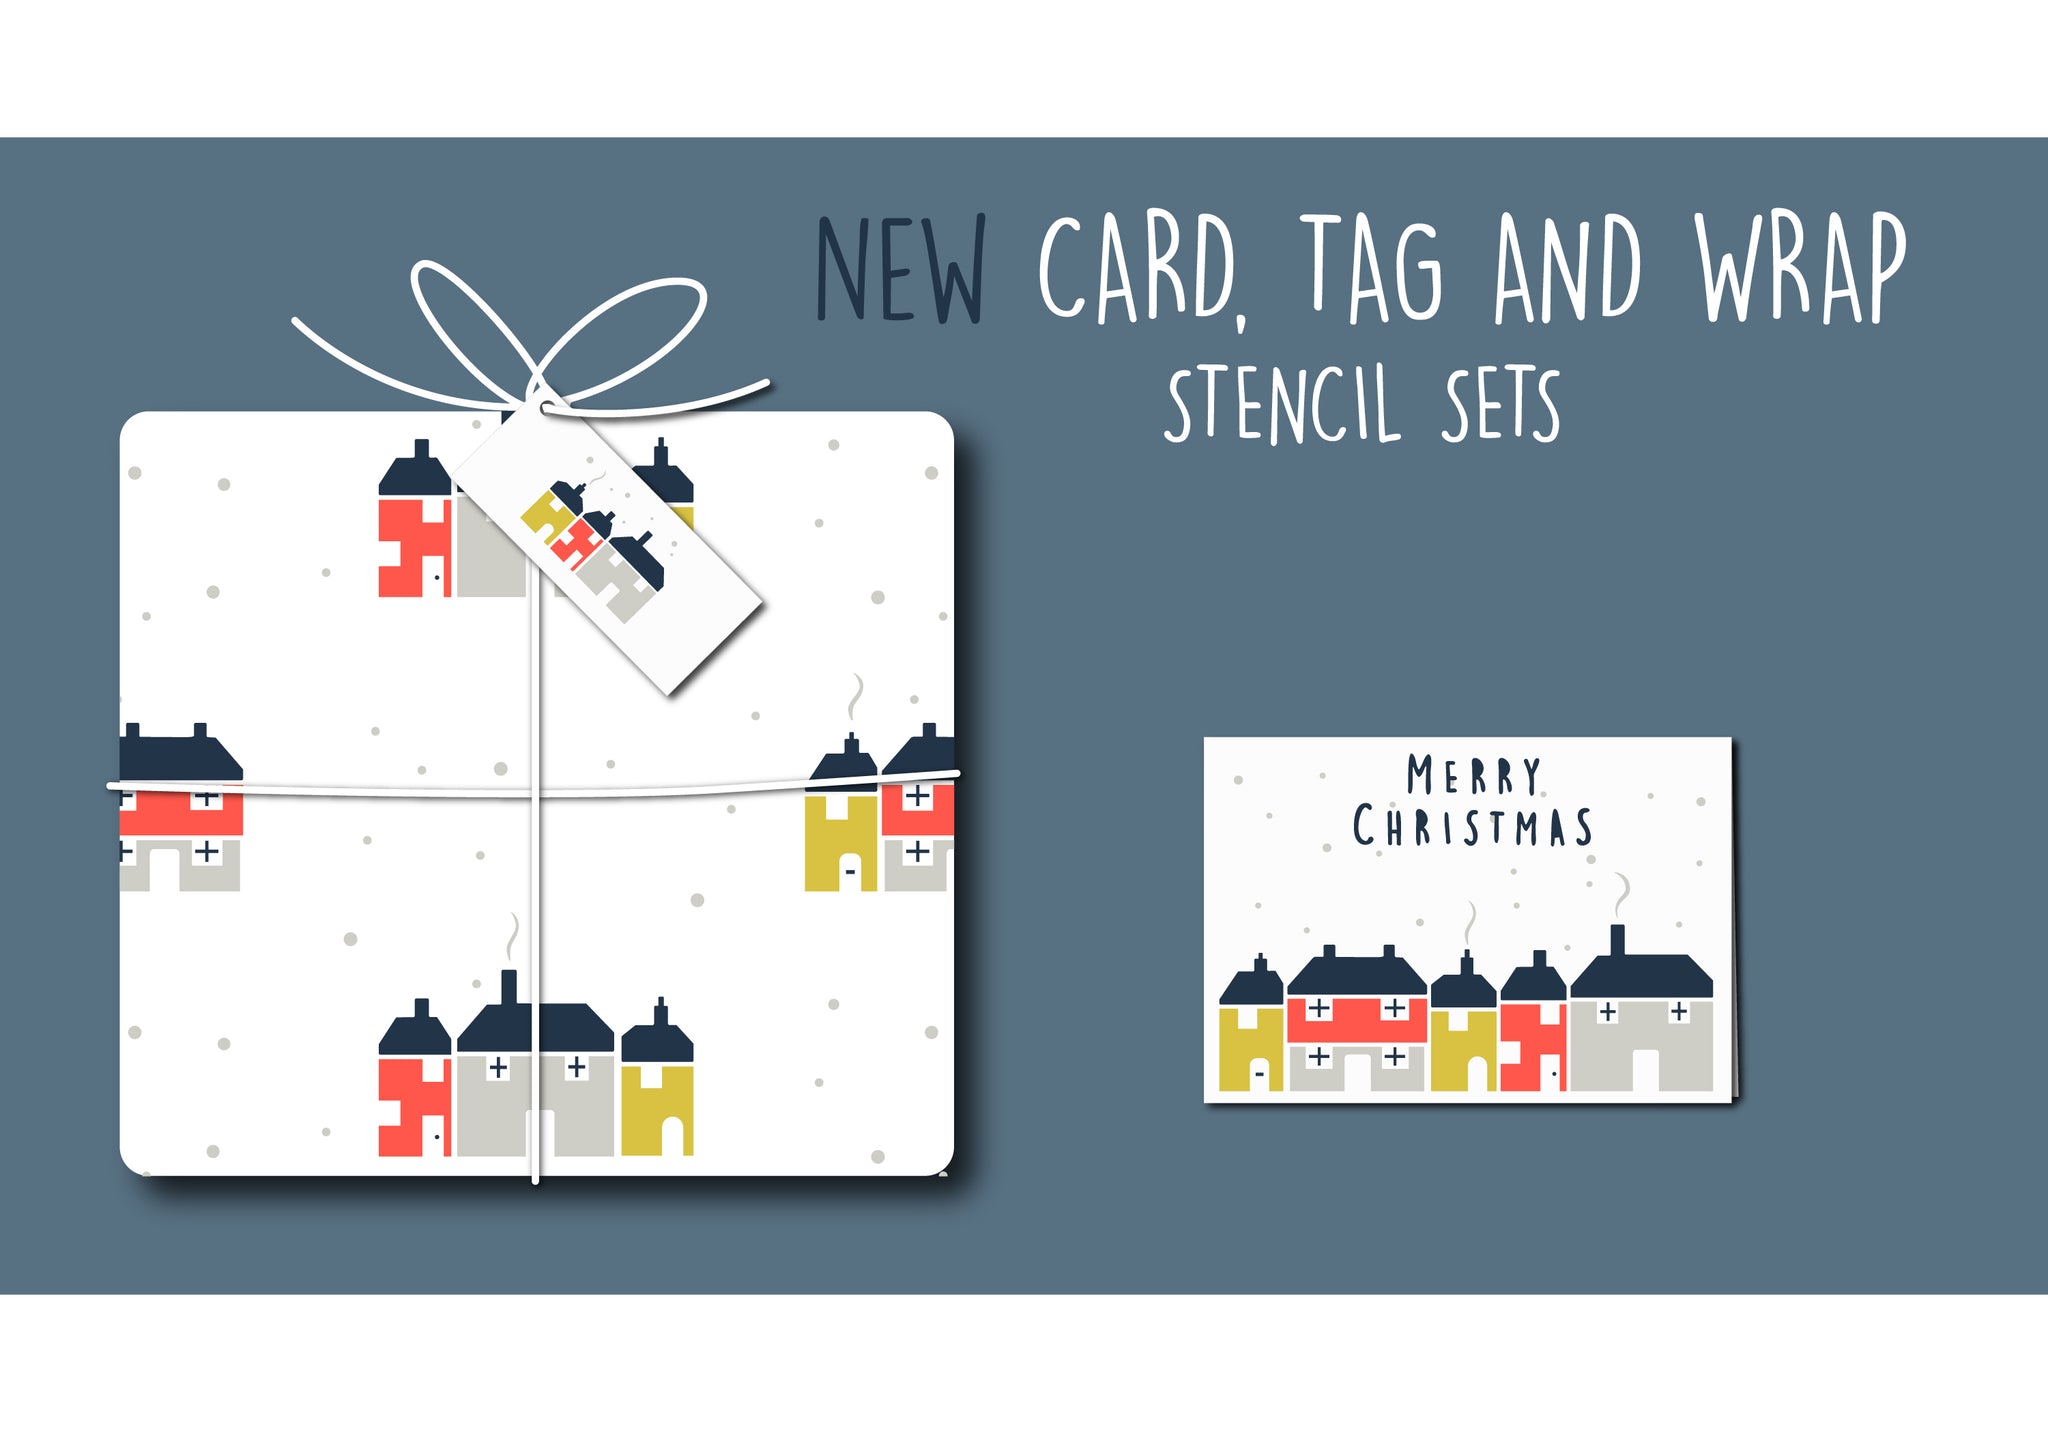 New card, tag and wrap stencil sets